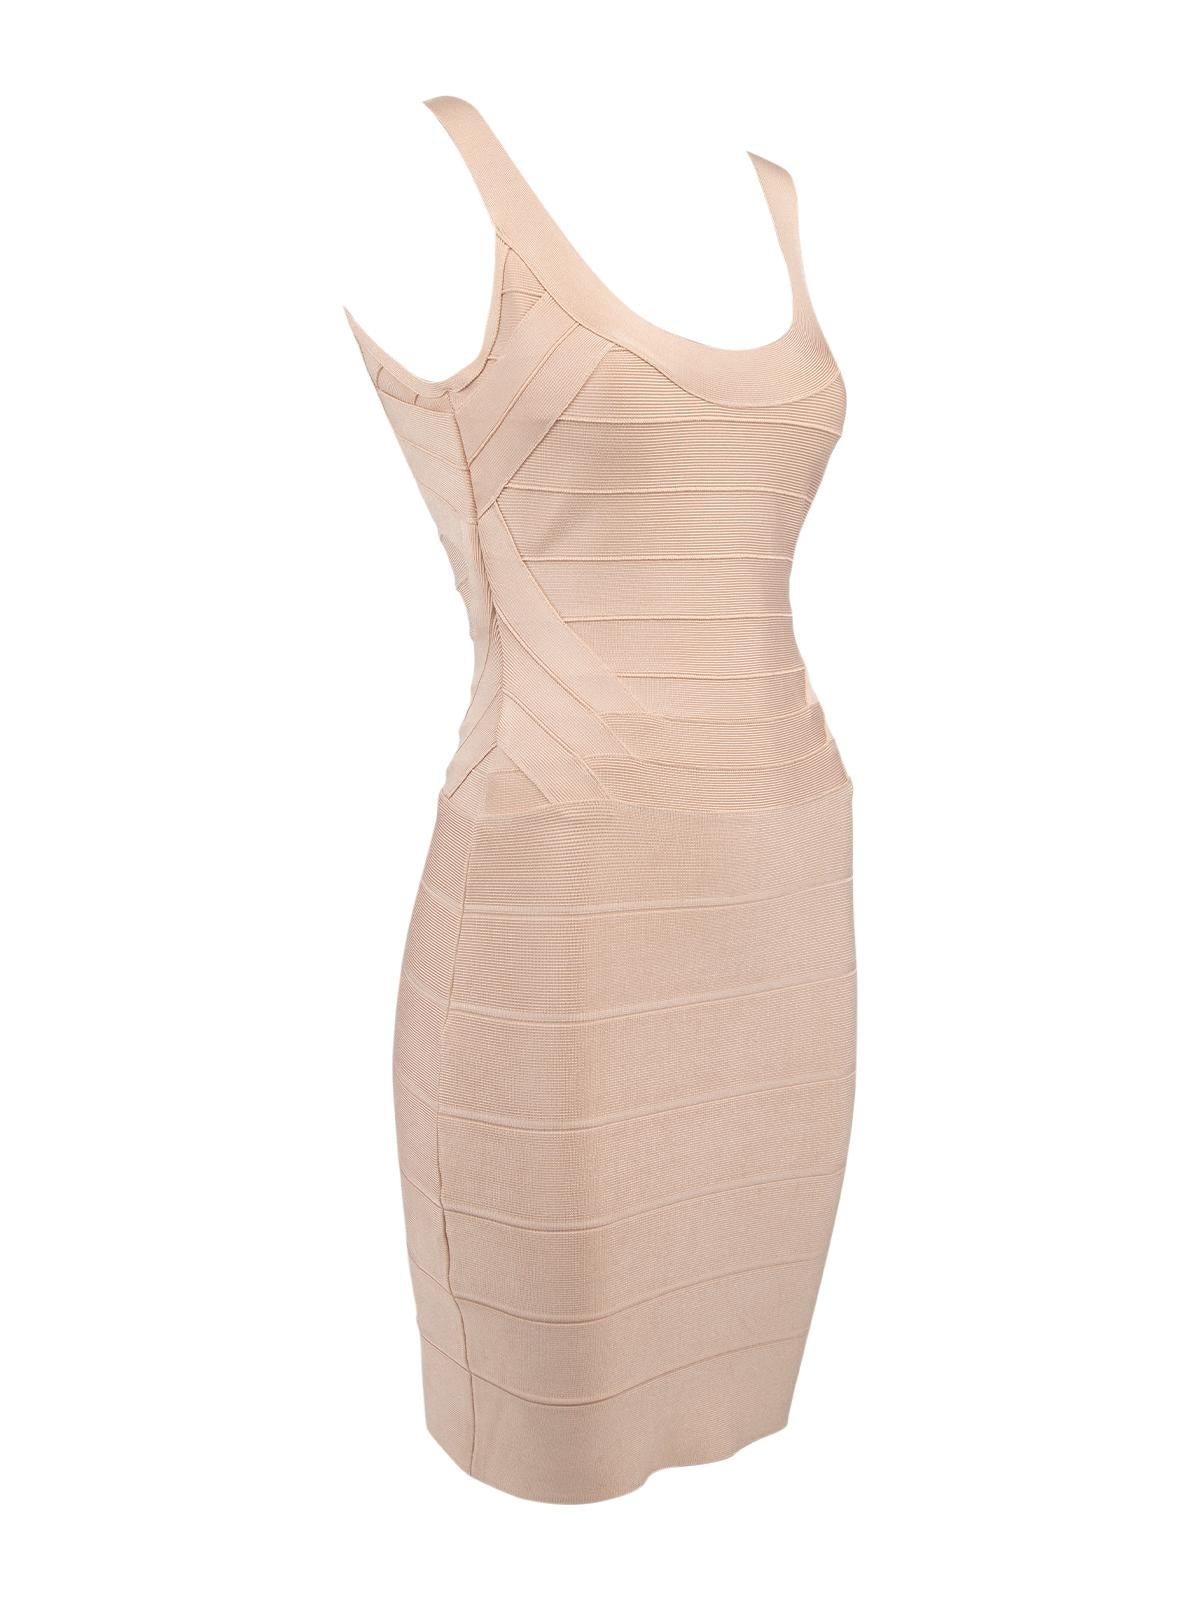 CONDITION is Very good. Minimal wear to dress is evident. Overall wear to outer fabric on this used Herve Leger designer resale item. Details Nude Rayon Bodycon style Tight fit Sleeveless Round neckline Thick straps Made in CHINA Composition 90%